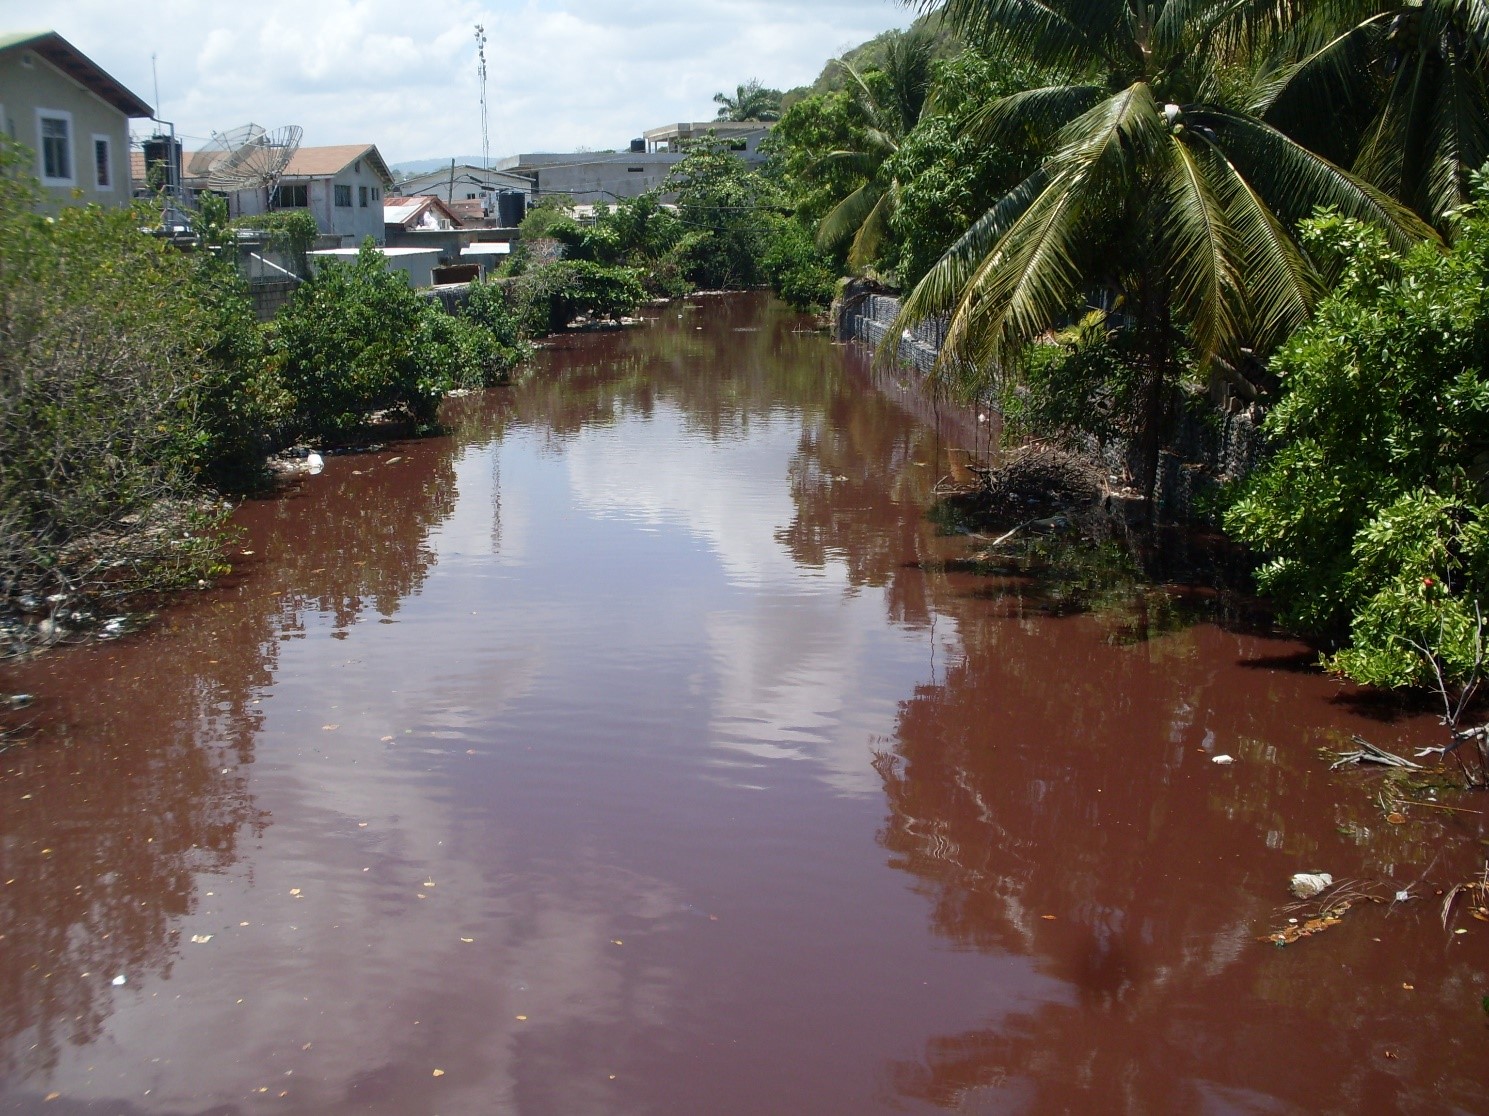 Photograph showing discolouration of the Outram River near bridge in Port Maria town centre; looking inland on August 13, 2019.